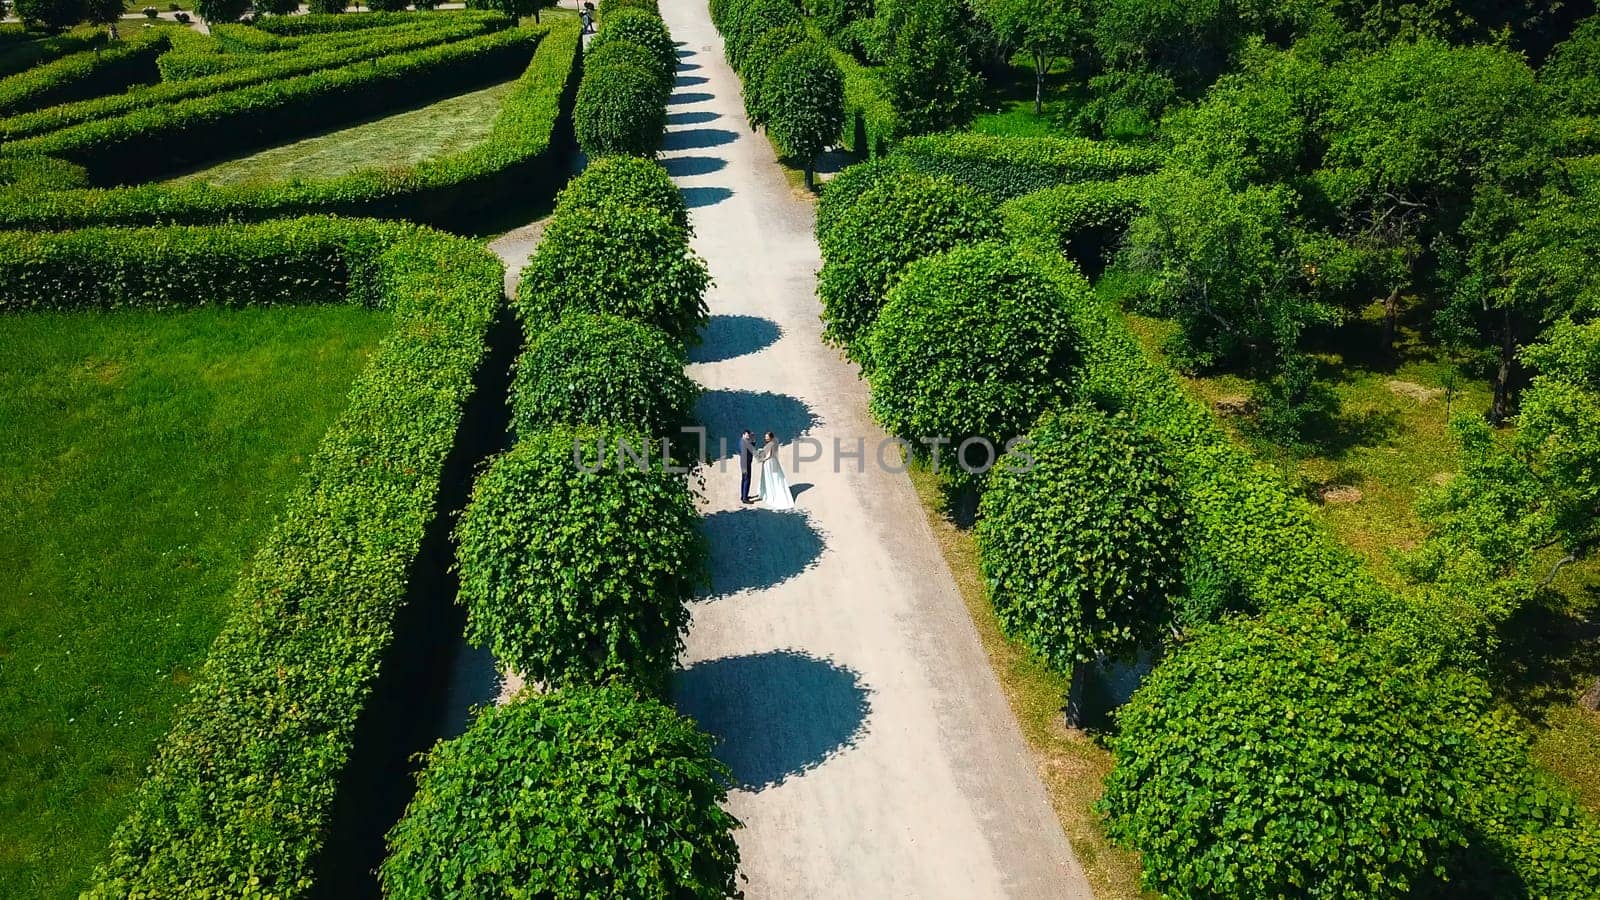 Beautiful couple of newlyweds walking in palace garden. Creative. Top view of newlyweds walking along alley in park. Palace Park with geometric paths and walking newlyweds by Mediawhalestock